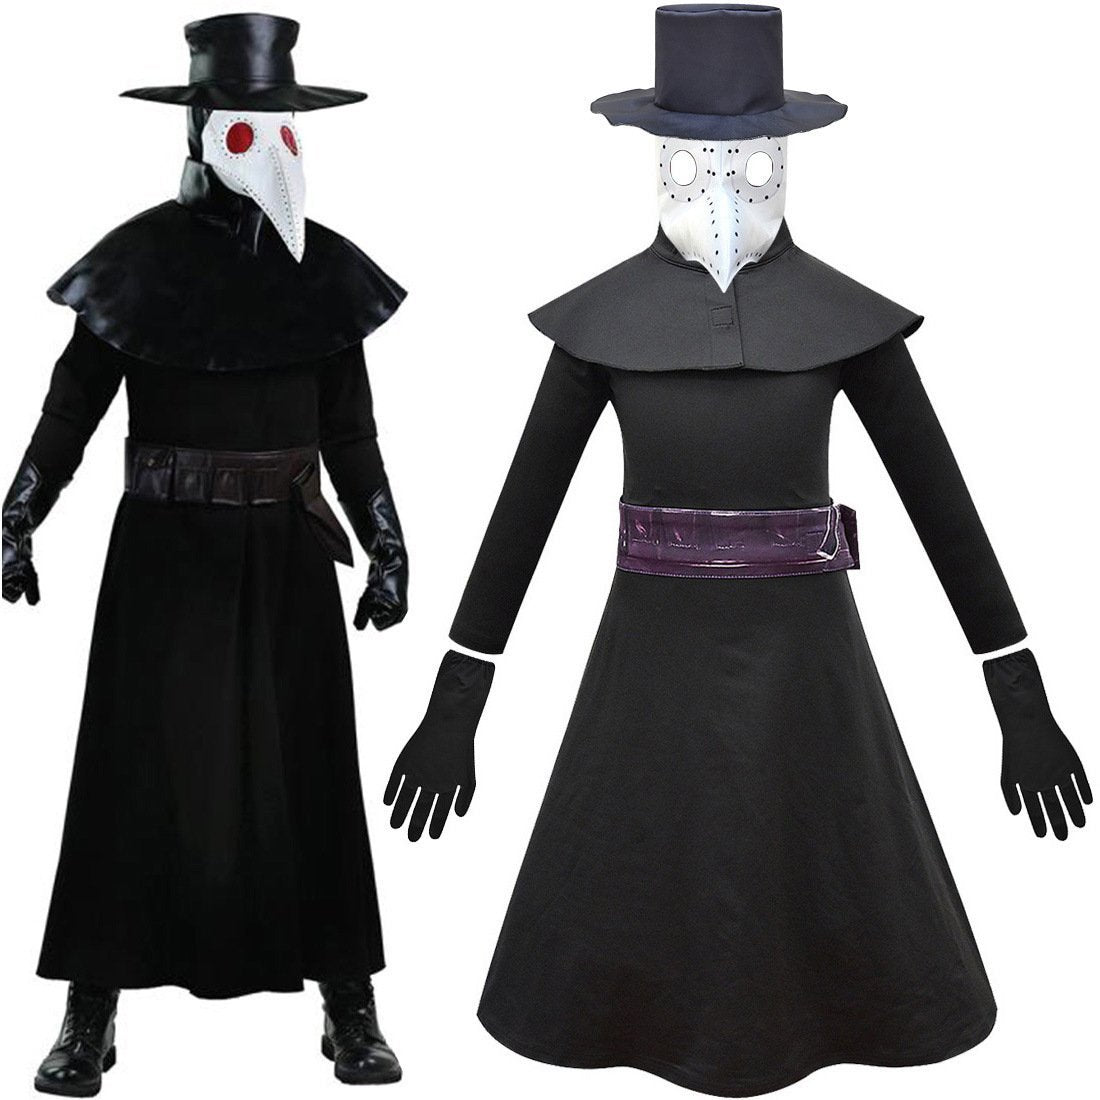 Kids Plague Doctor Cosplay Costume Long Robe Cape Outfits Steampunk Plague Doctor Cosplay Dress-Pajamasbuy